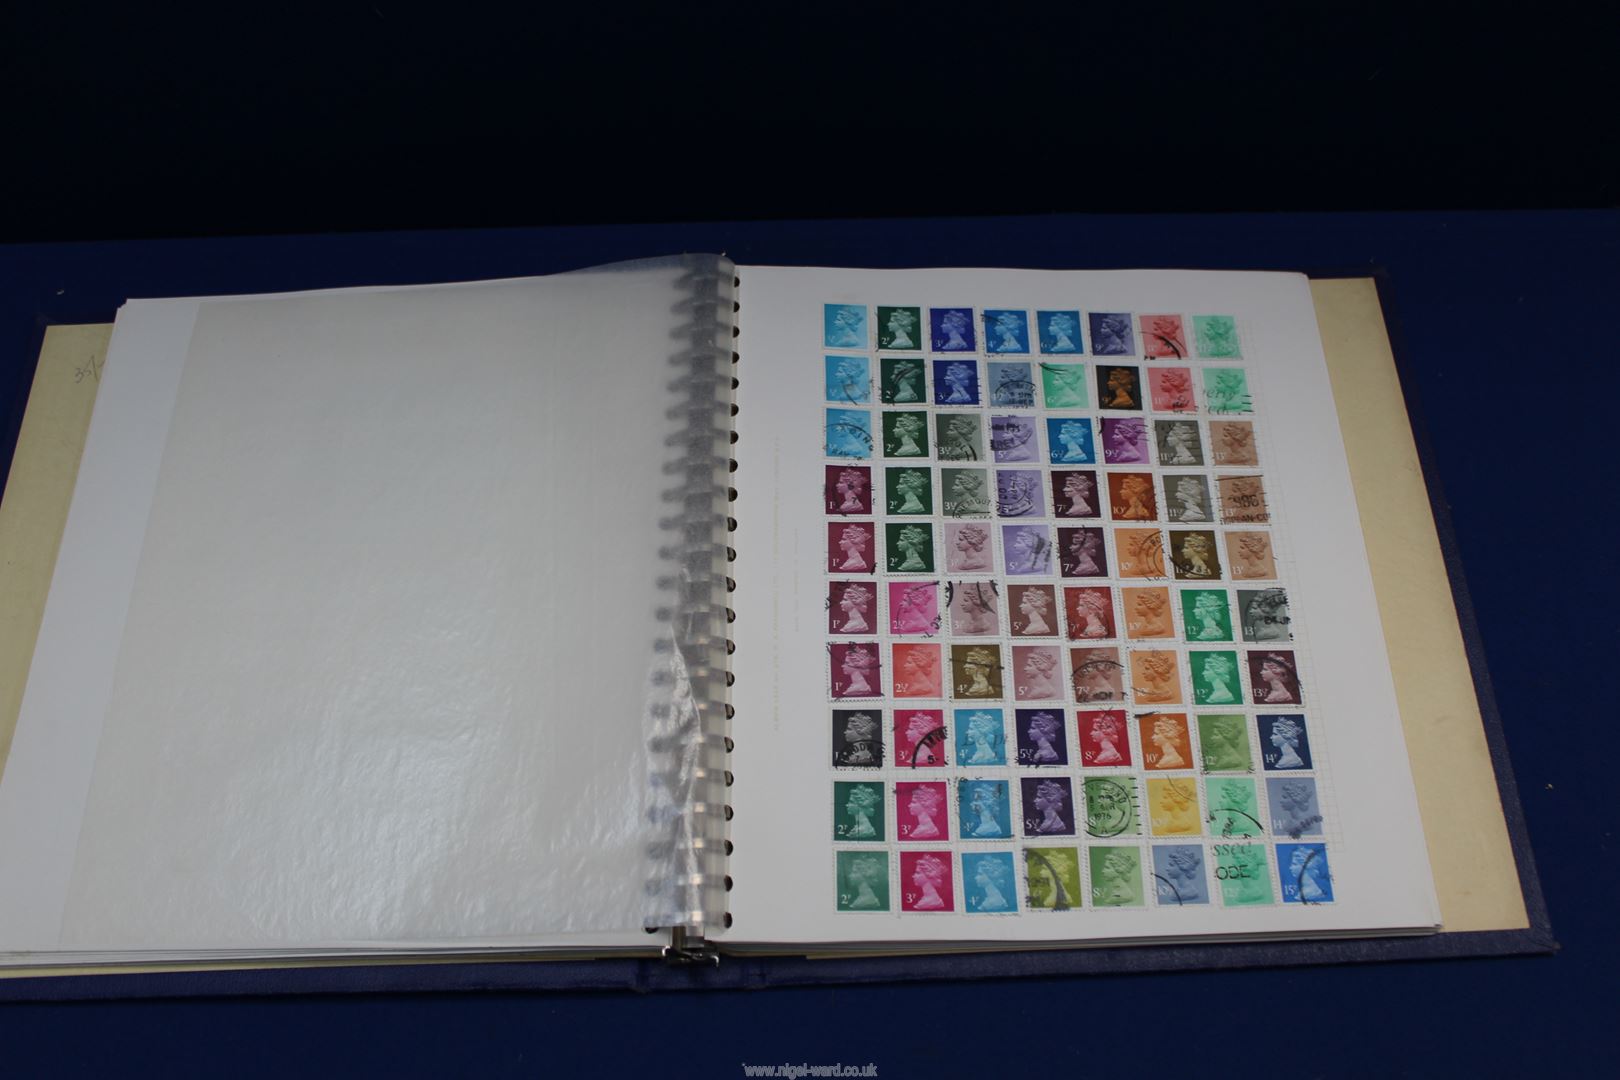 A blue lever Album with interleaves containing approximately 900 different British and World stamps. - Image 3 of 4